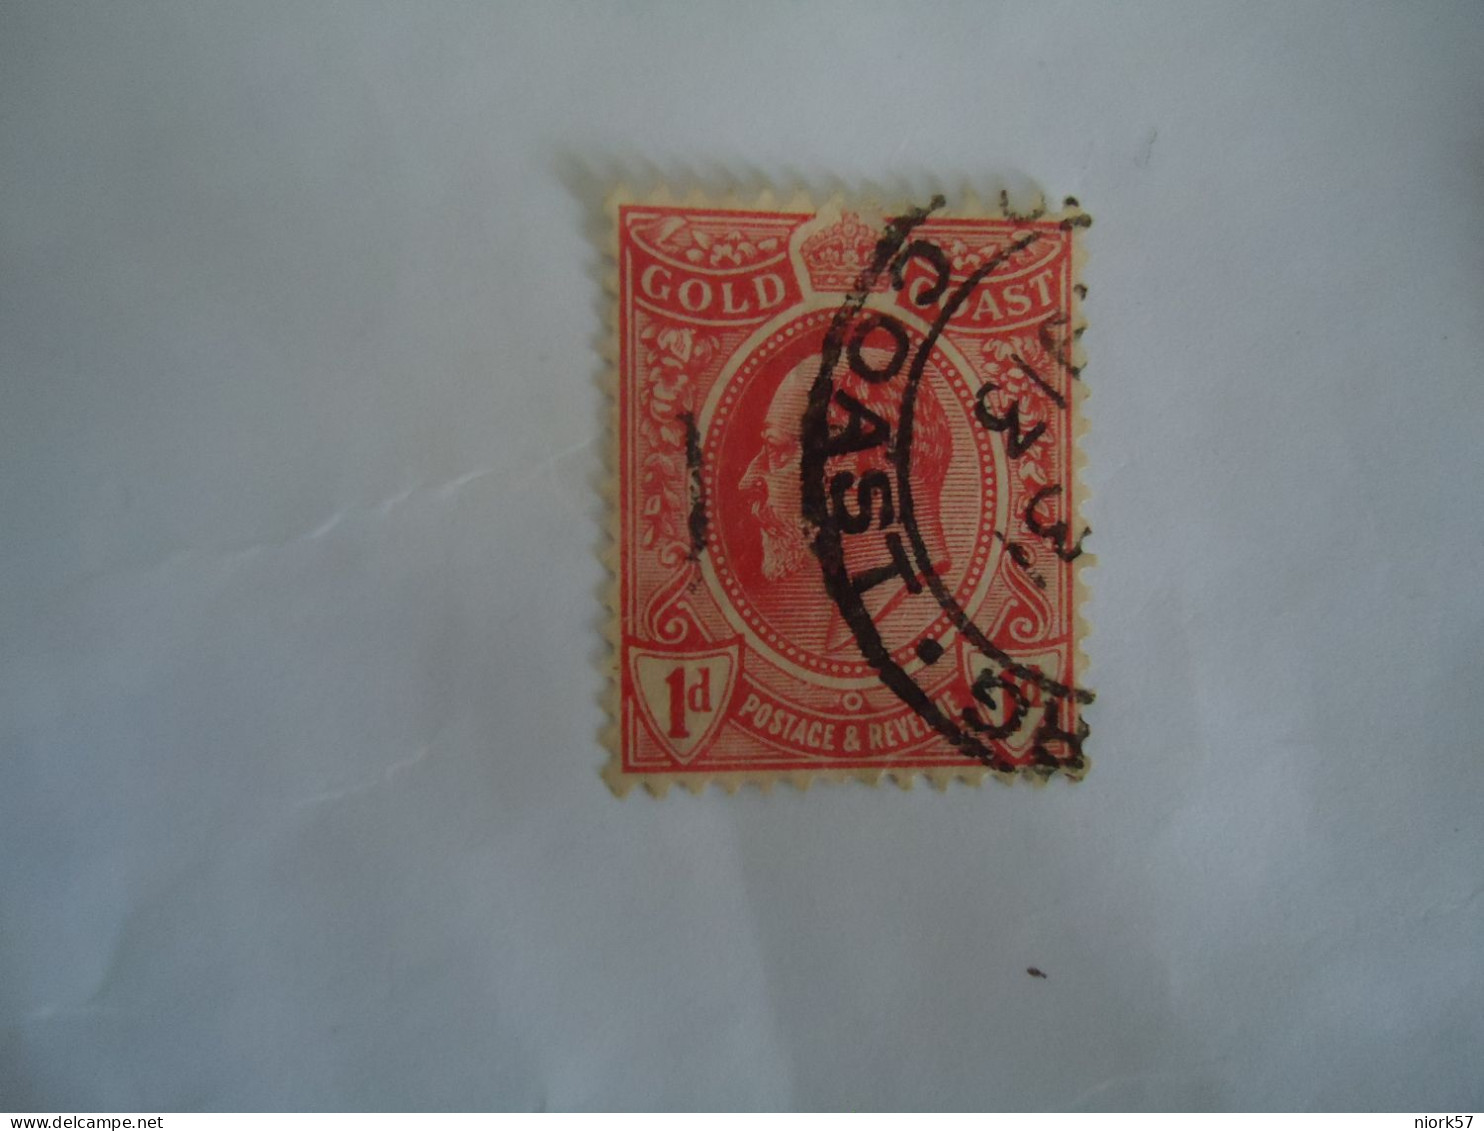 GOLD COAST  USED   STAMPS  KING  WITH POSTMARK - Goudkust (...-1957)